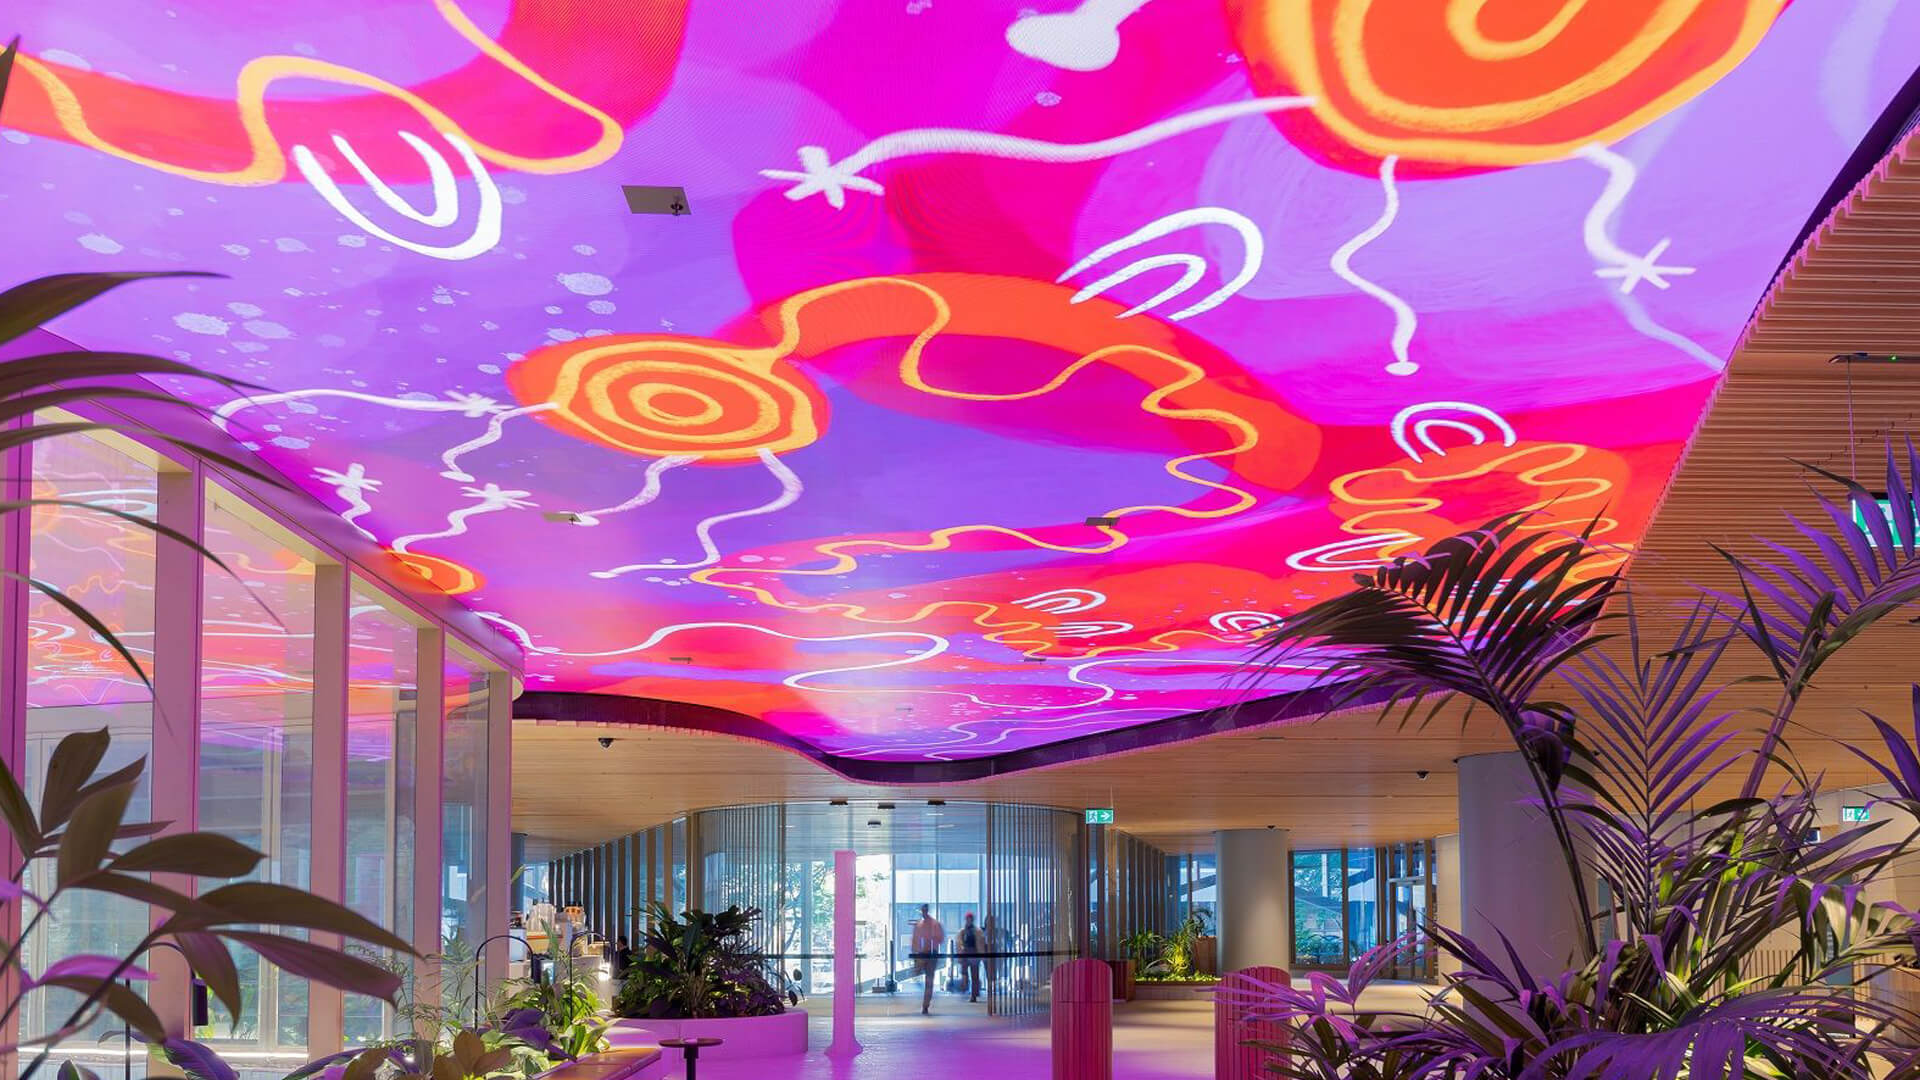 Photo of Mirvac Heritage Lanes commercial lobby foyer in Brisbane Australia showing digital placemaking art screen with vibrant pink indigenous Australian aboriginal artwork created by artist Rachael Sarra in partnership with VANDAL.